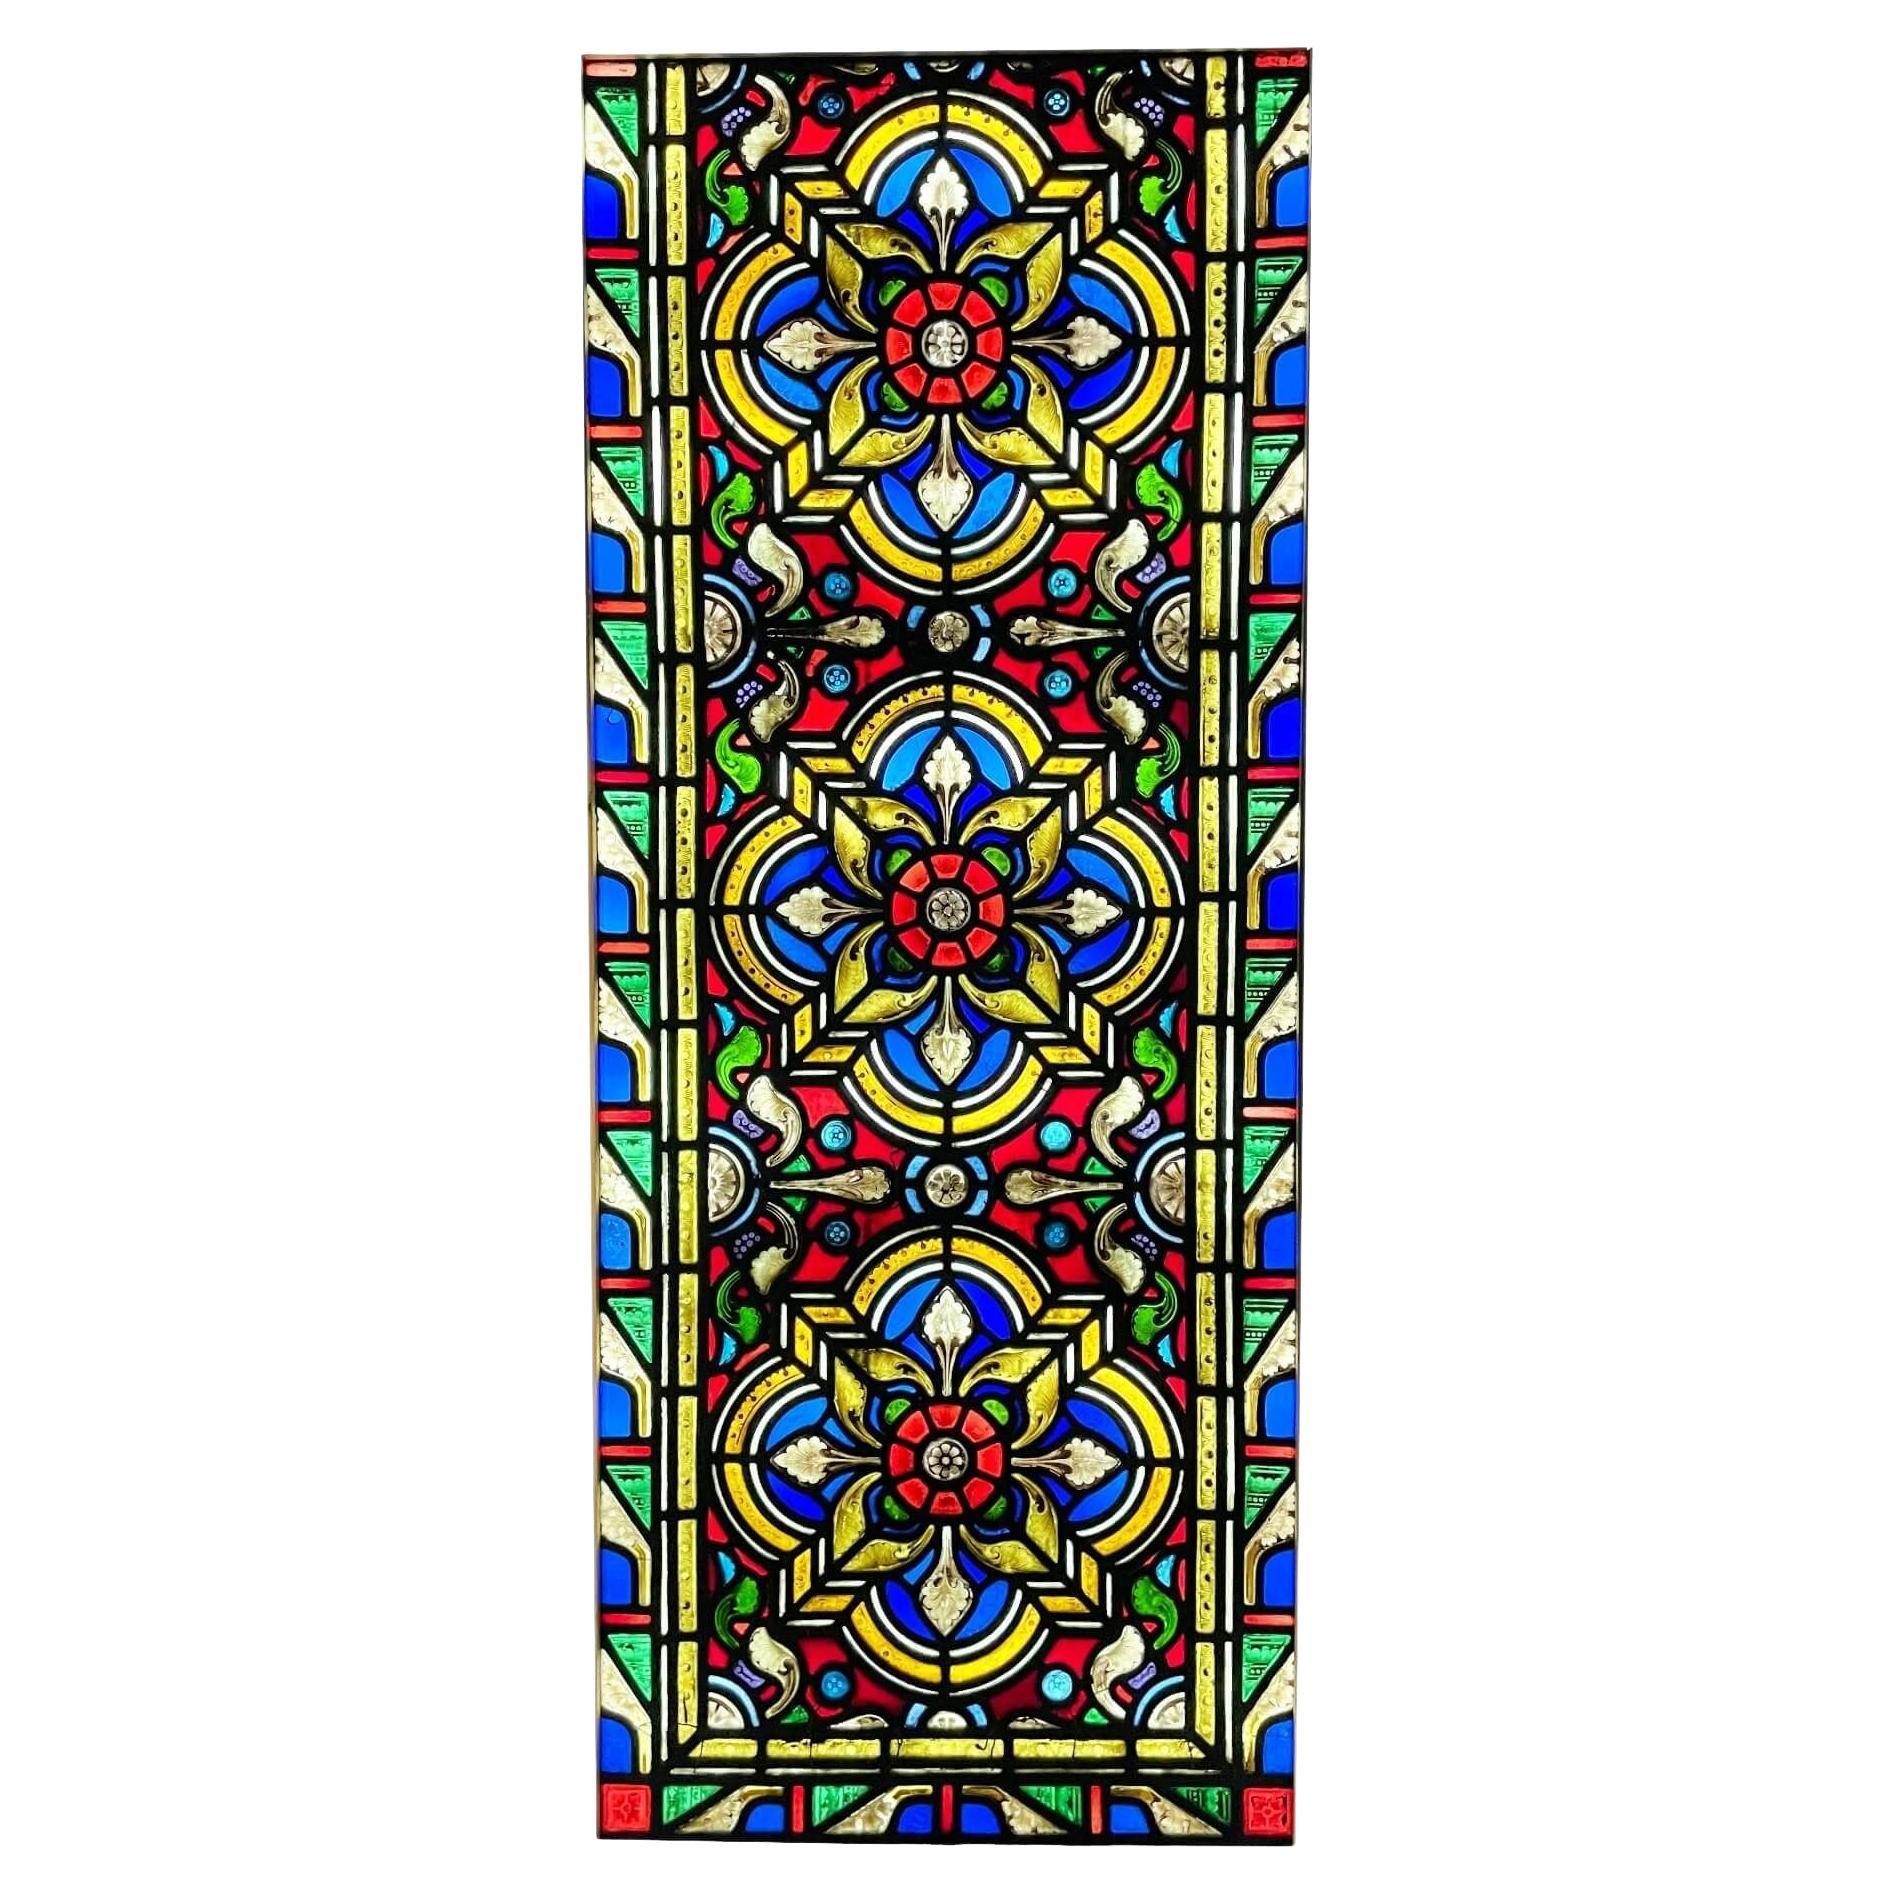 Large Victorian Tudor Rose Stained Glass Window For Sale